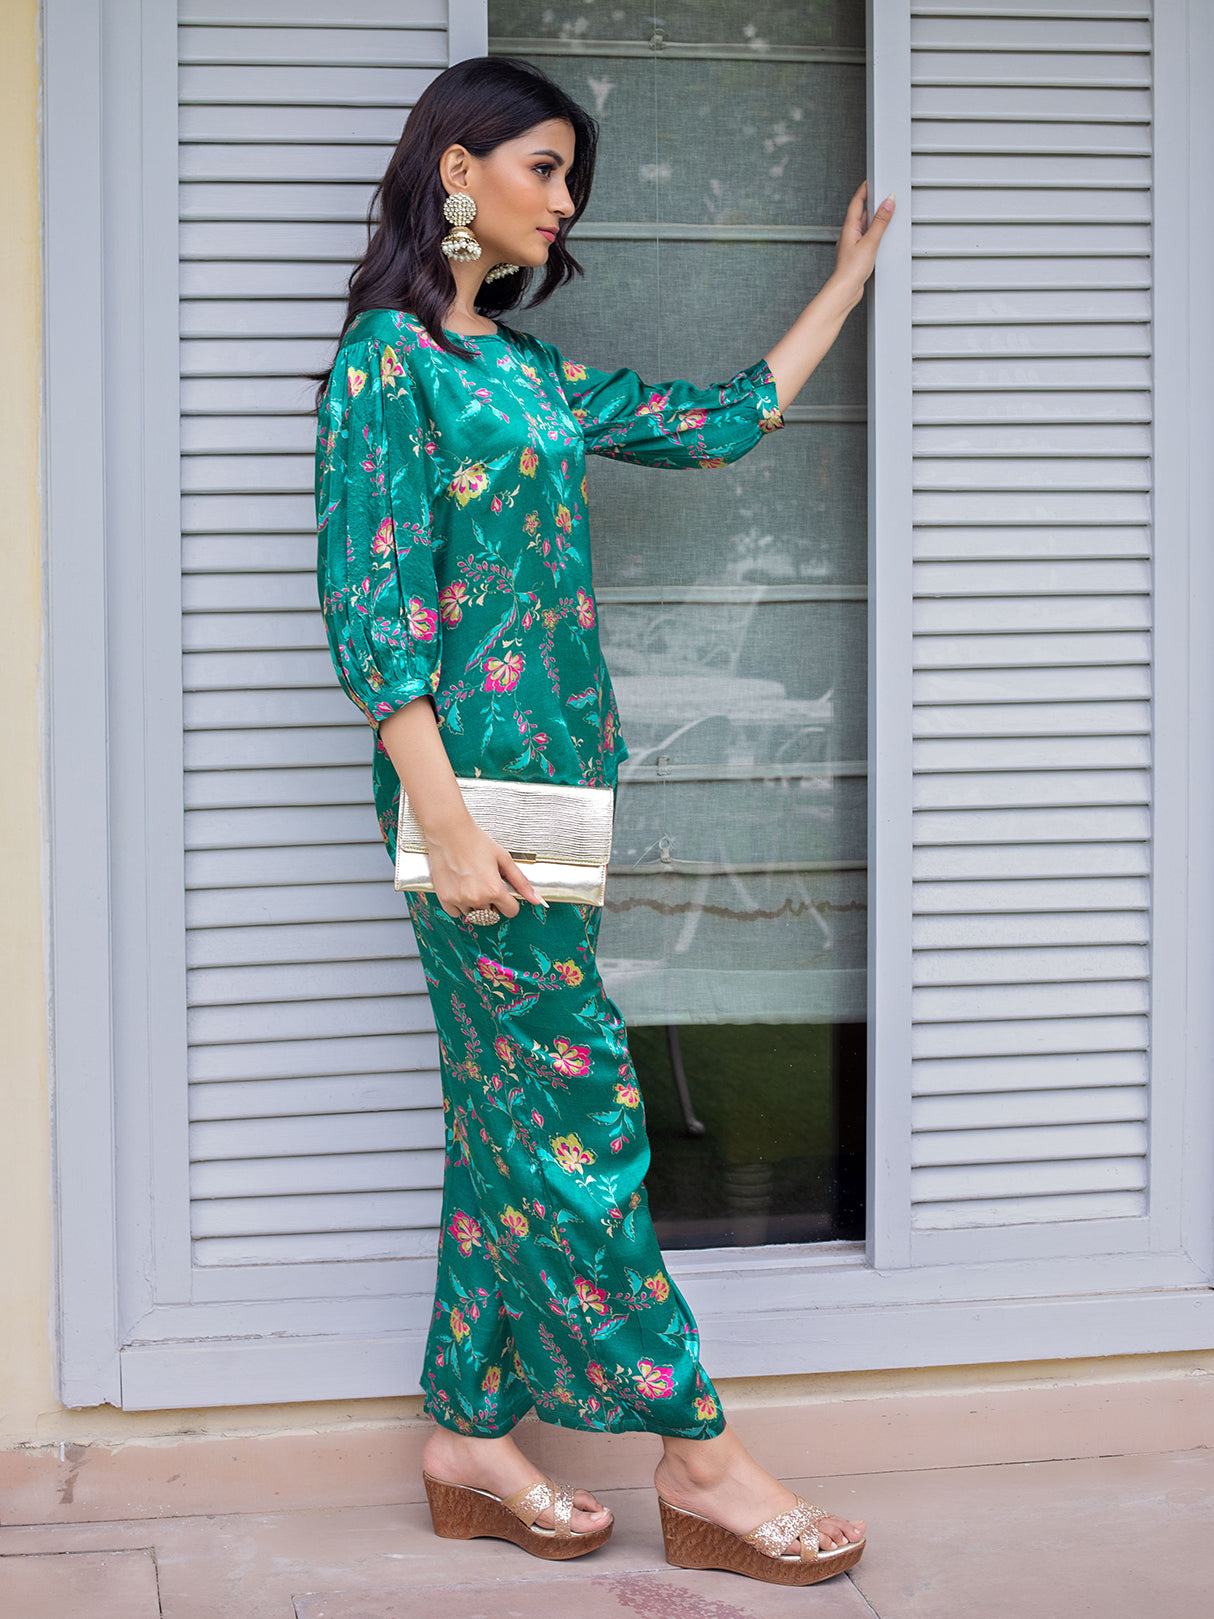 elevate-your-look-with-our-bottle-green-co-ord-set-showcasing-a-digital-floral-jaal-print-effortlessly-stylish-perfect-for-a-chic-statement